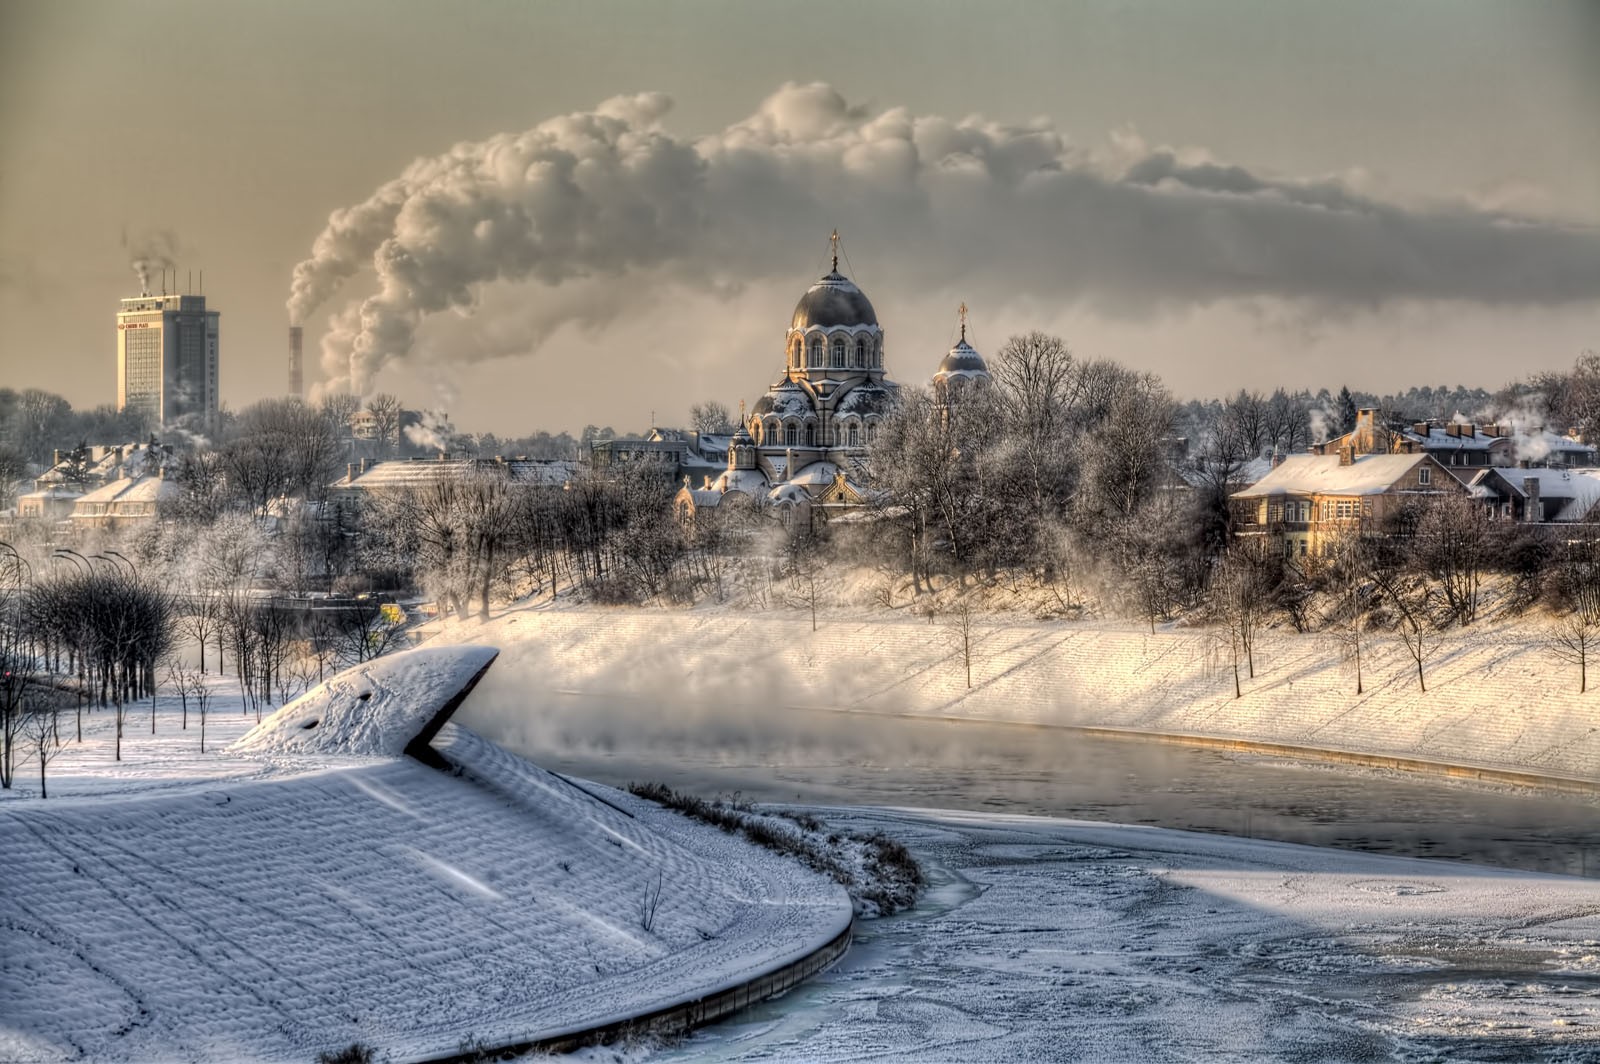 Architecture City Cityscape Trees Building Lithuania Landscape Winter Snow Cathedral Smoke Chimneys  1600x1064